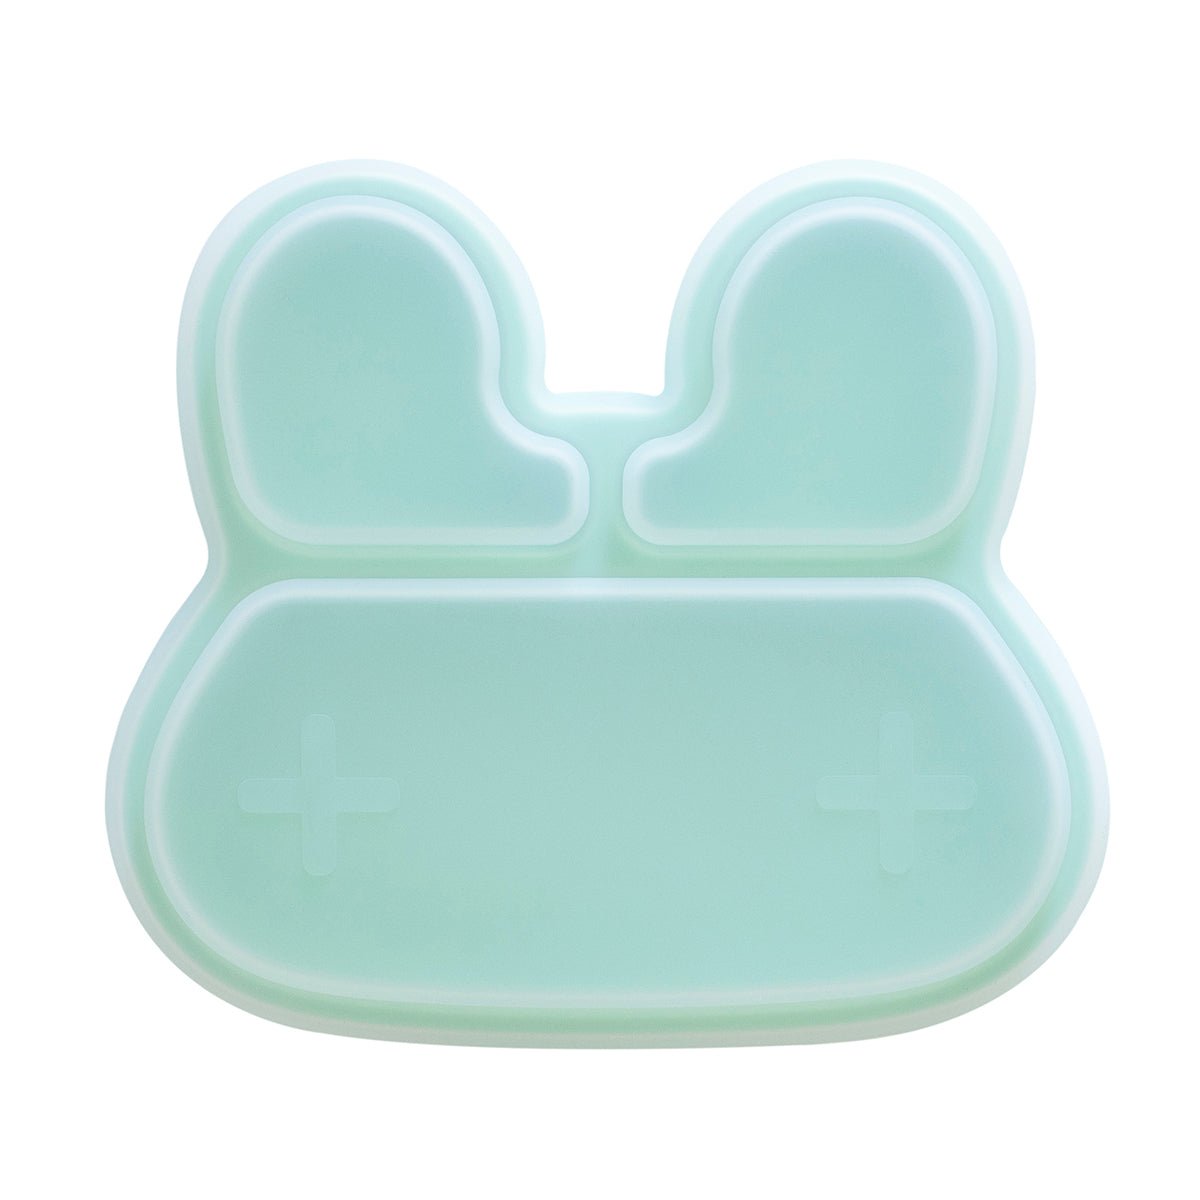 Stickie Bunny plate lid | We Might Be Tiny